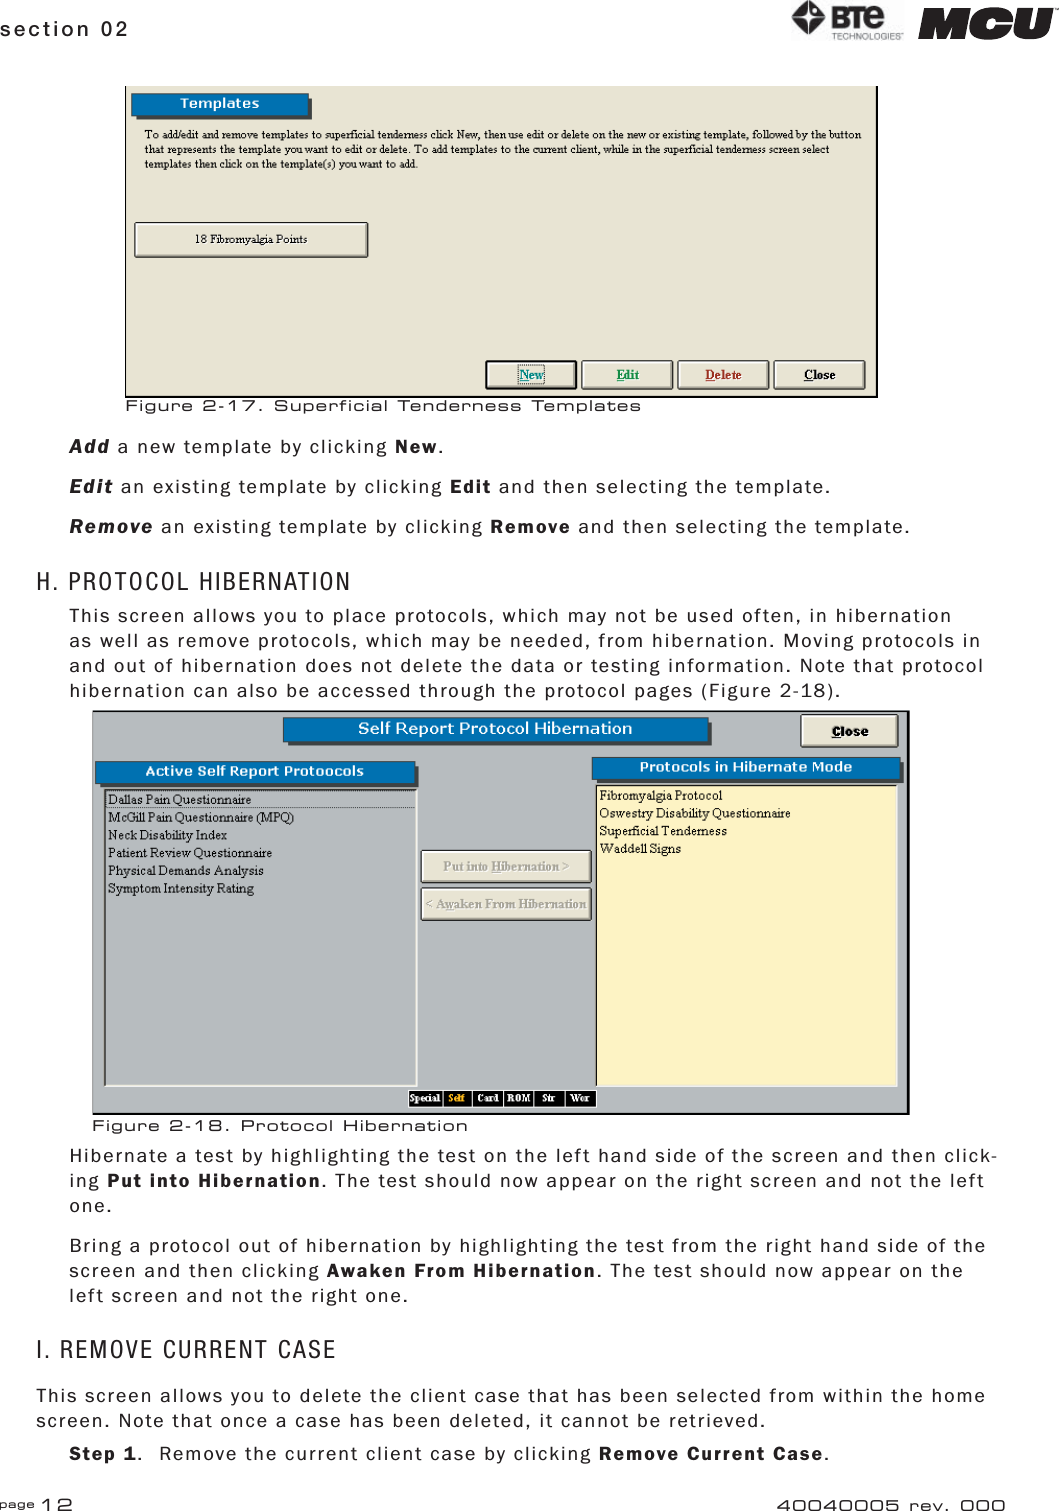 page 12section 02 40040005 rev. 000Add a new template by clicking New.Edit an existing template by clicking Edit and then selecting the template.Remove an existing template by clicking Remove and then selecting the template.H. PROTOCOL HIBERNATIONThis screen allows you to place protocols, which may not be used often, in hibernation as well as remove protocols, which may be needed, from hibernation. Moving protocols in and out of hibernation does not delete the data or testing information. Note that protocol hibernation can also be accessed through the protocol pages (Figure 2-18).Hibernate a test by highlighting the test on the left hand side of the screen and then click-ing Put into Hibernation. The test should now appear on the right screen and not the left one.Bring a protocol out of hibernation by highlighting the test from the right hand side of the screen and then clicking Awaken From Hibernation. The test should now appear on the left screen and not the right one.I. REMOVE CURRENT CASEThis screen allows you to delete the client case that has been selected from within the home screen. Note that once a case has been deleted, it cannot be retrieved.Step 1.  Remove the current client case by clicking Remove Current Case. Figure 2-17. Superficial Tenderness TemplatesFigure 2-18. Protocol Hibernation